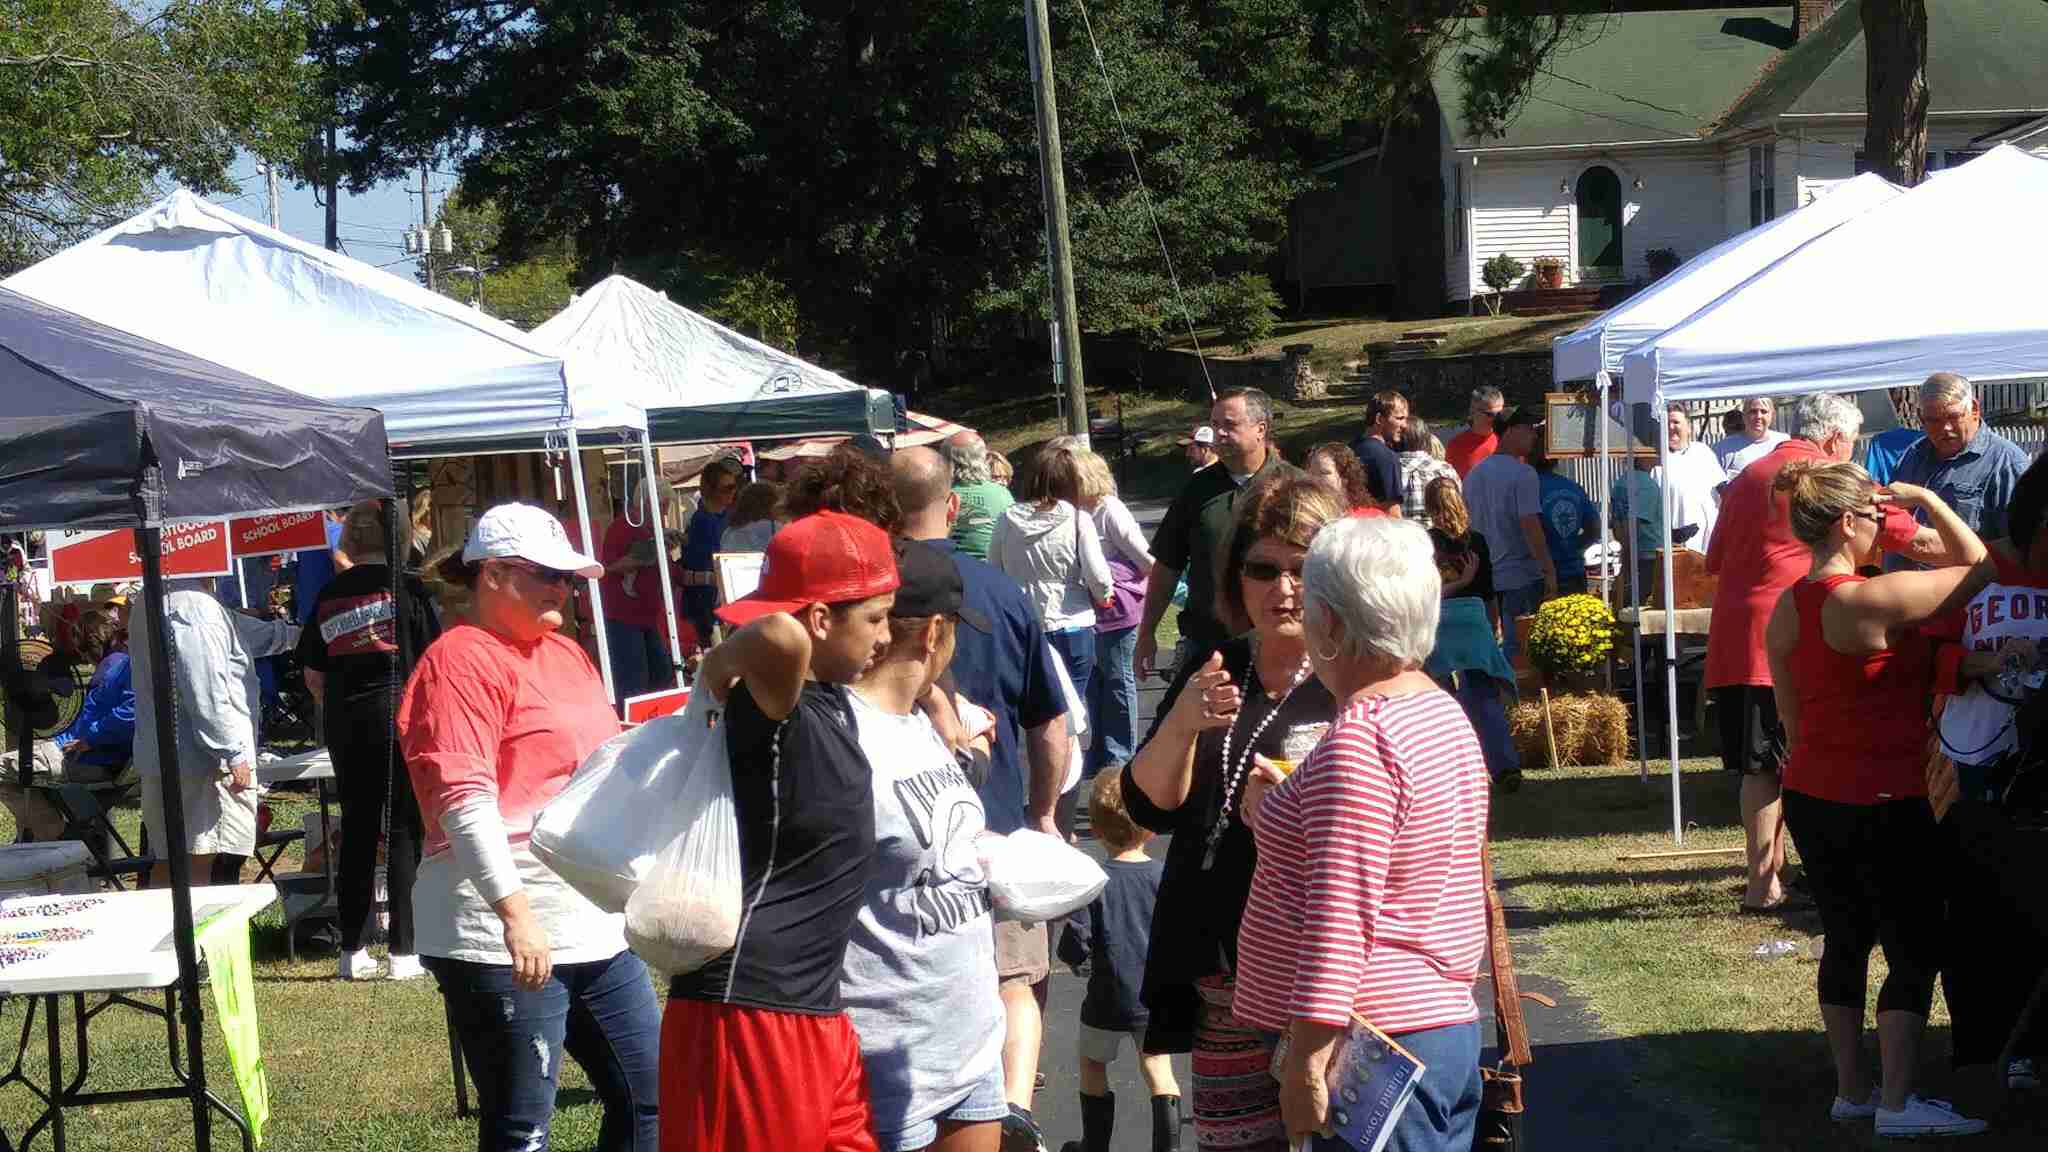 Summerville To Host Spring Market Saturday, April 1st In Dowdy Park